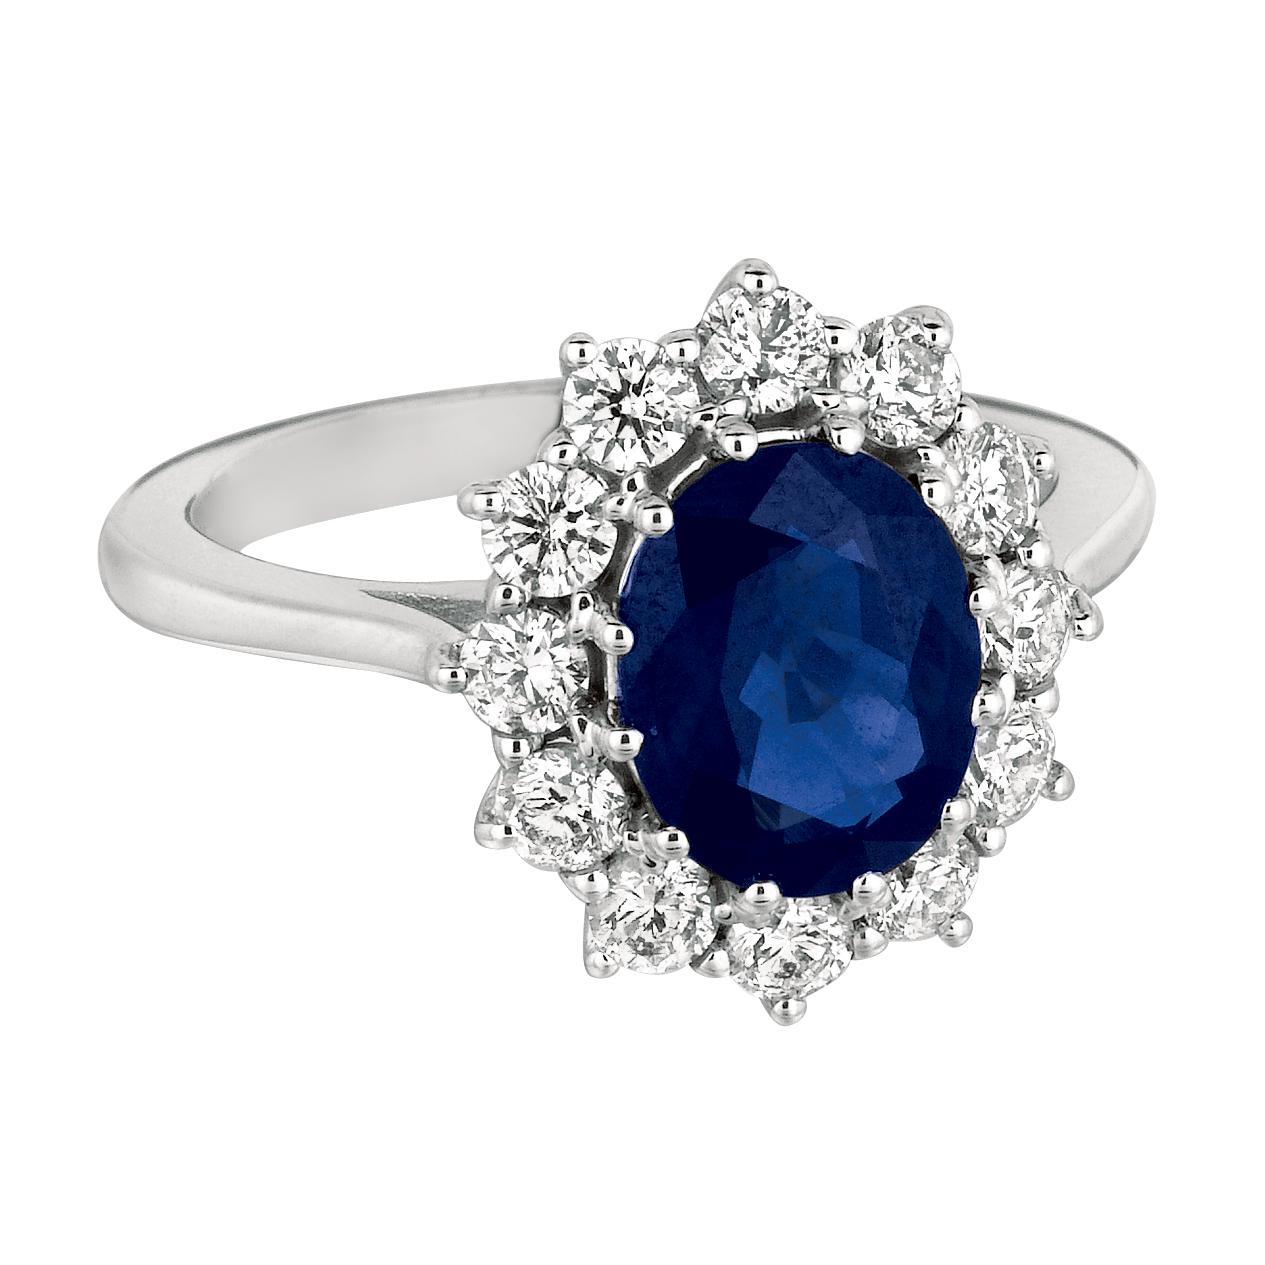 
Princess Diana Style 3.55 Carat Natural Diamond and Sapphire Oval Ring G SI 14K White Gold

100% Natural Diamonds and Sapphire
3.55CTW
Diamond Color G-H 
Diamond Clarity SI 
14K White Gold, Prong, 3.70 grams
9/16 inch in width 
Size 7 (can ordered